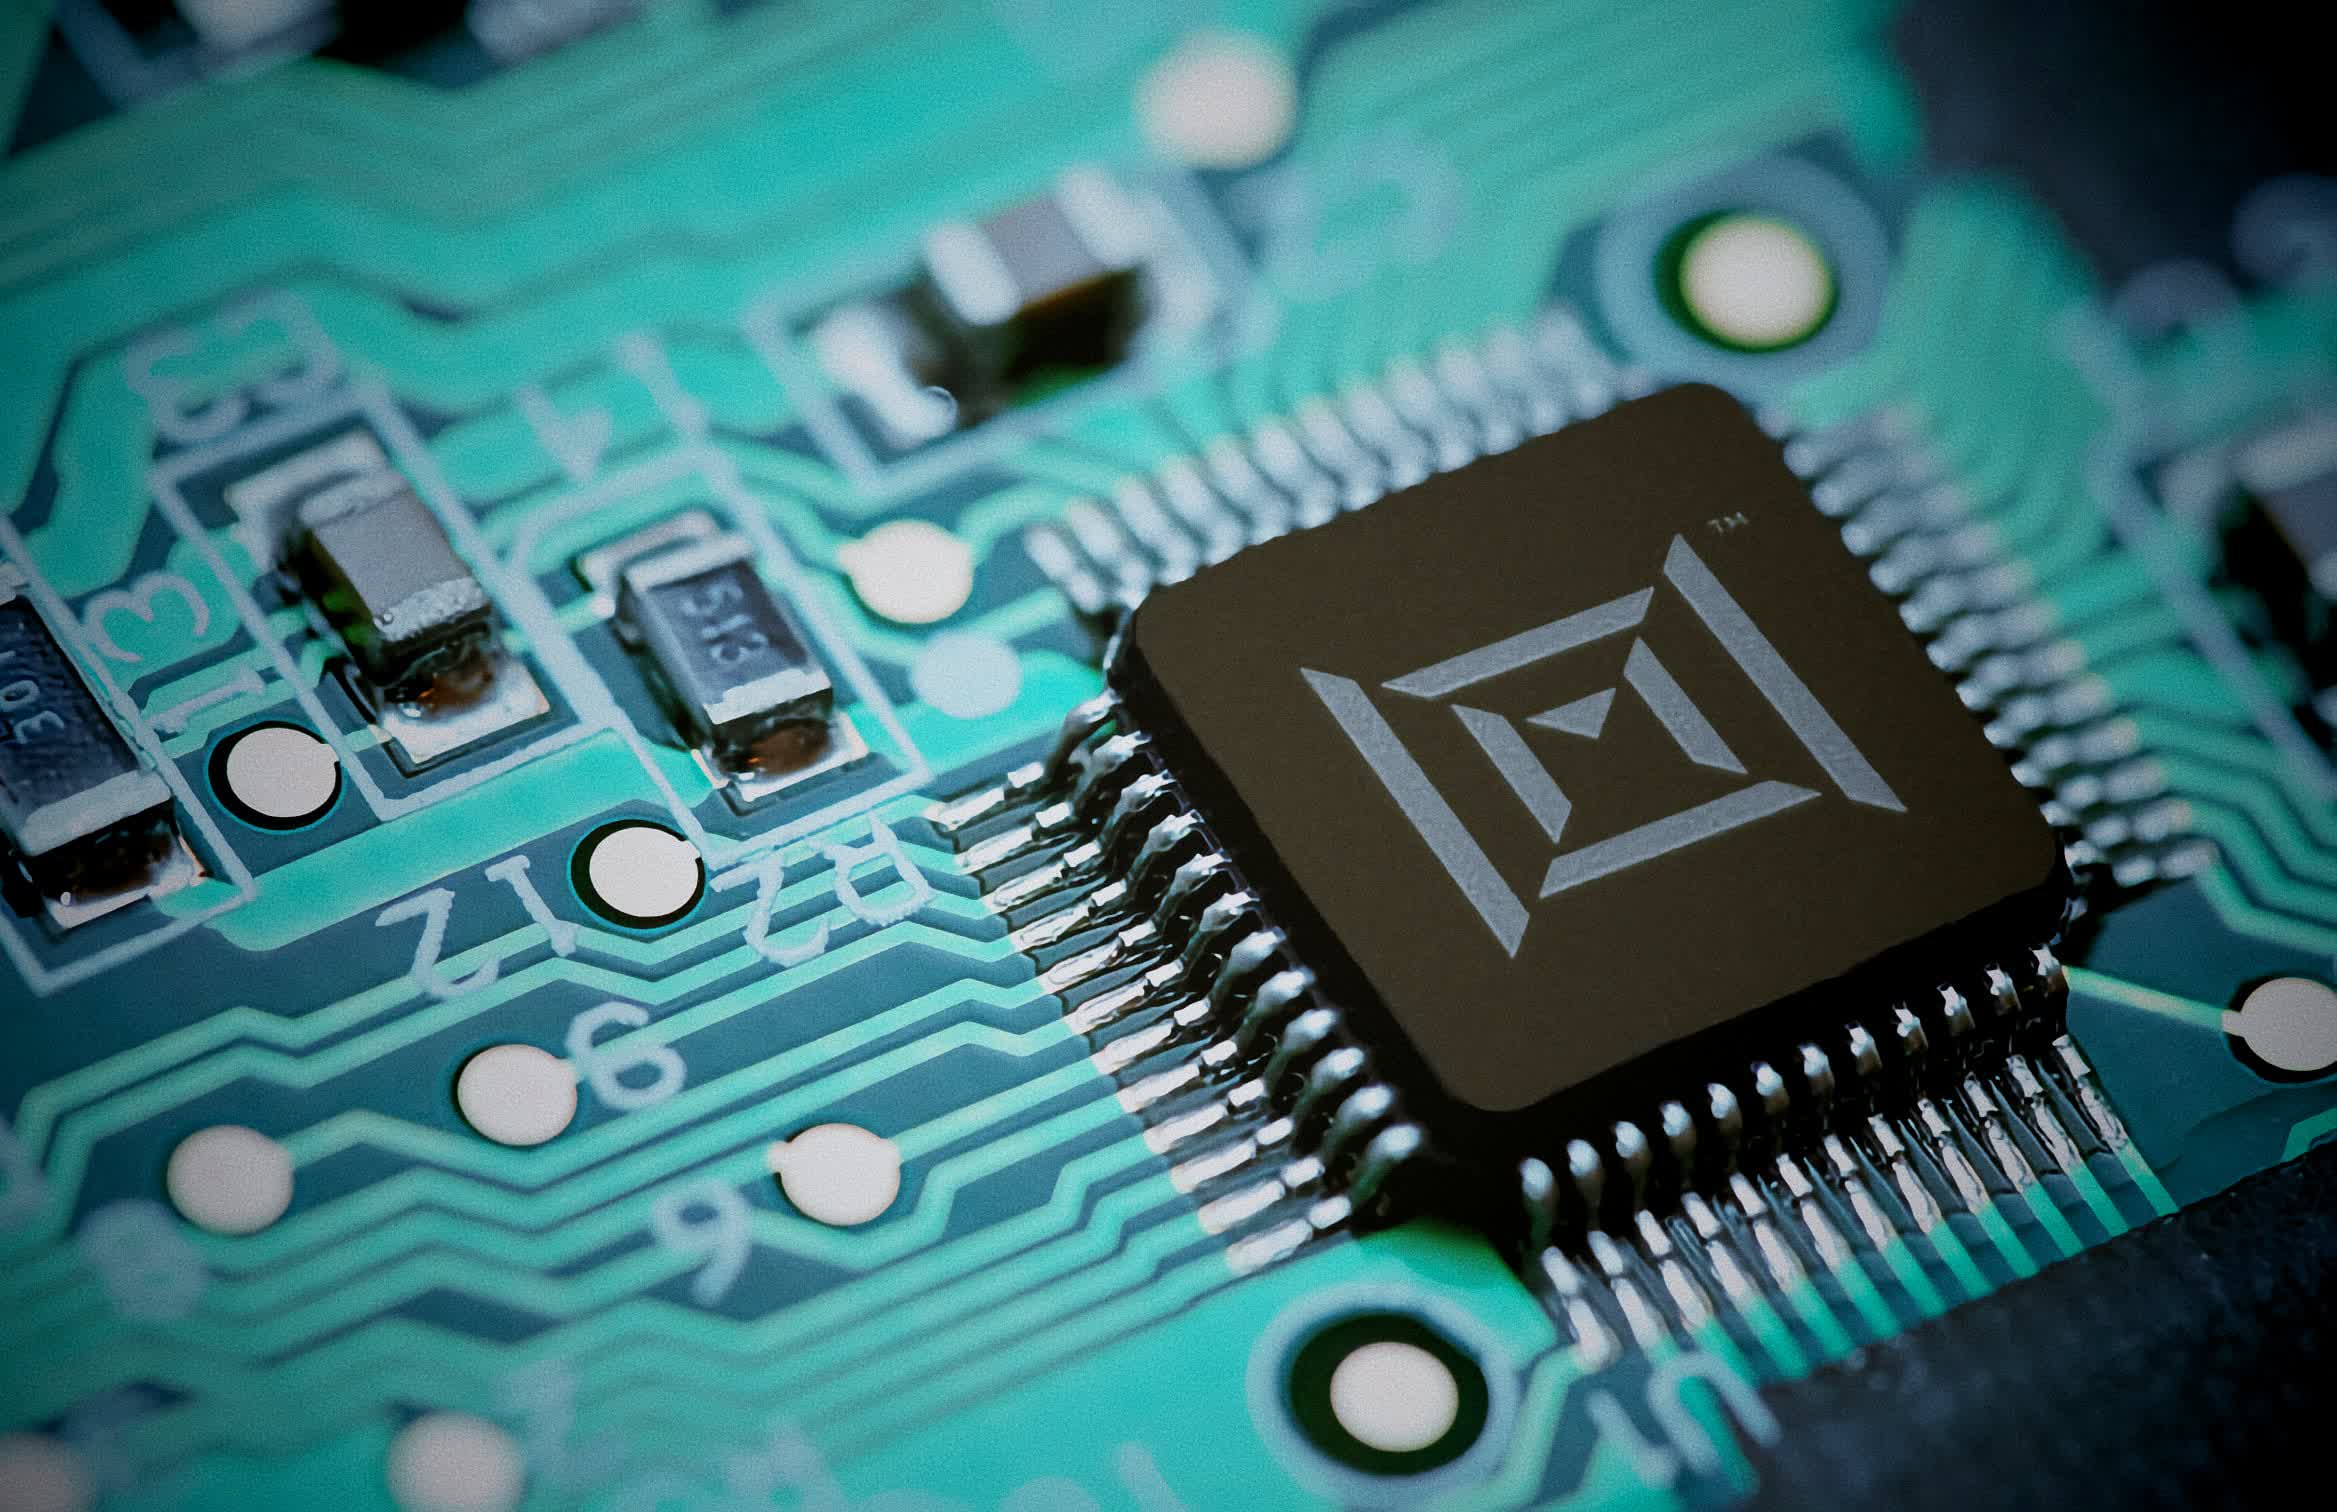 Marvell: Where do they fit in the world of semiconductors?